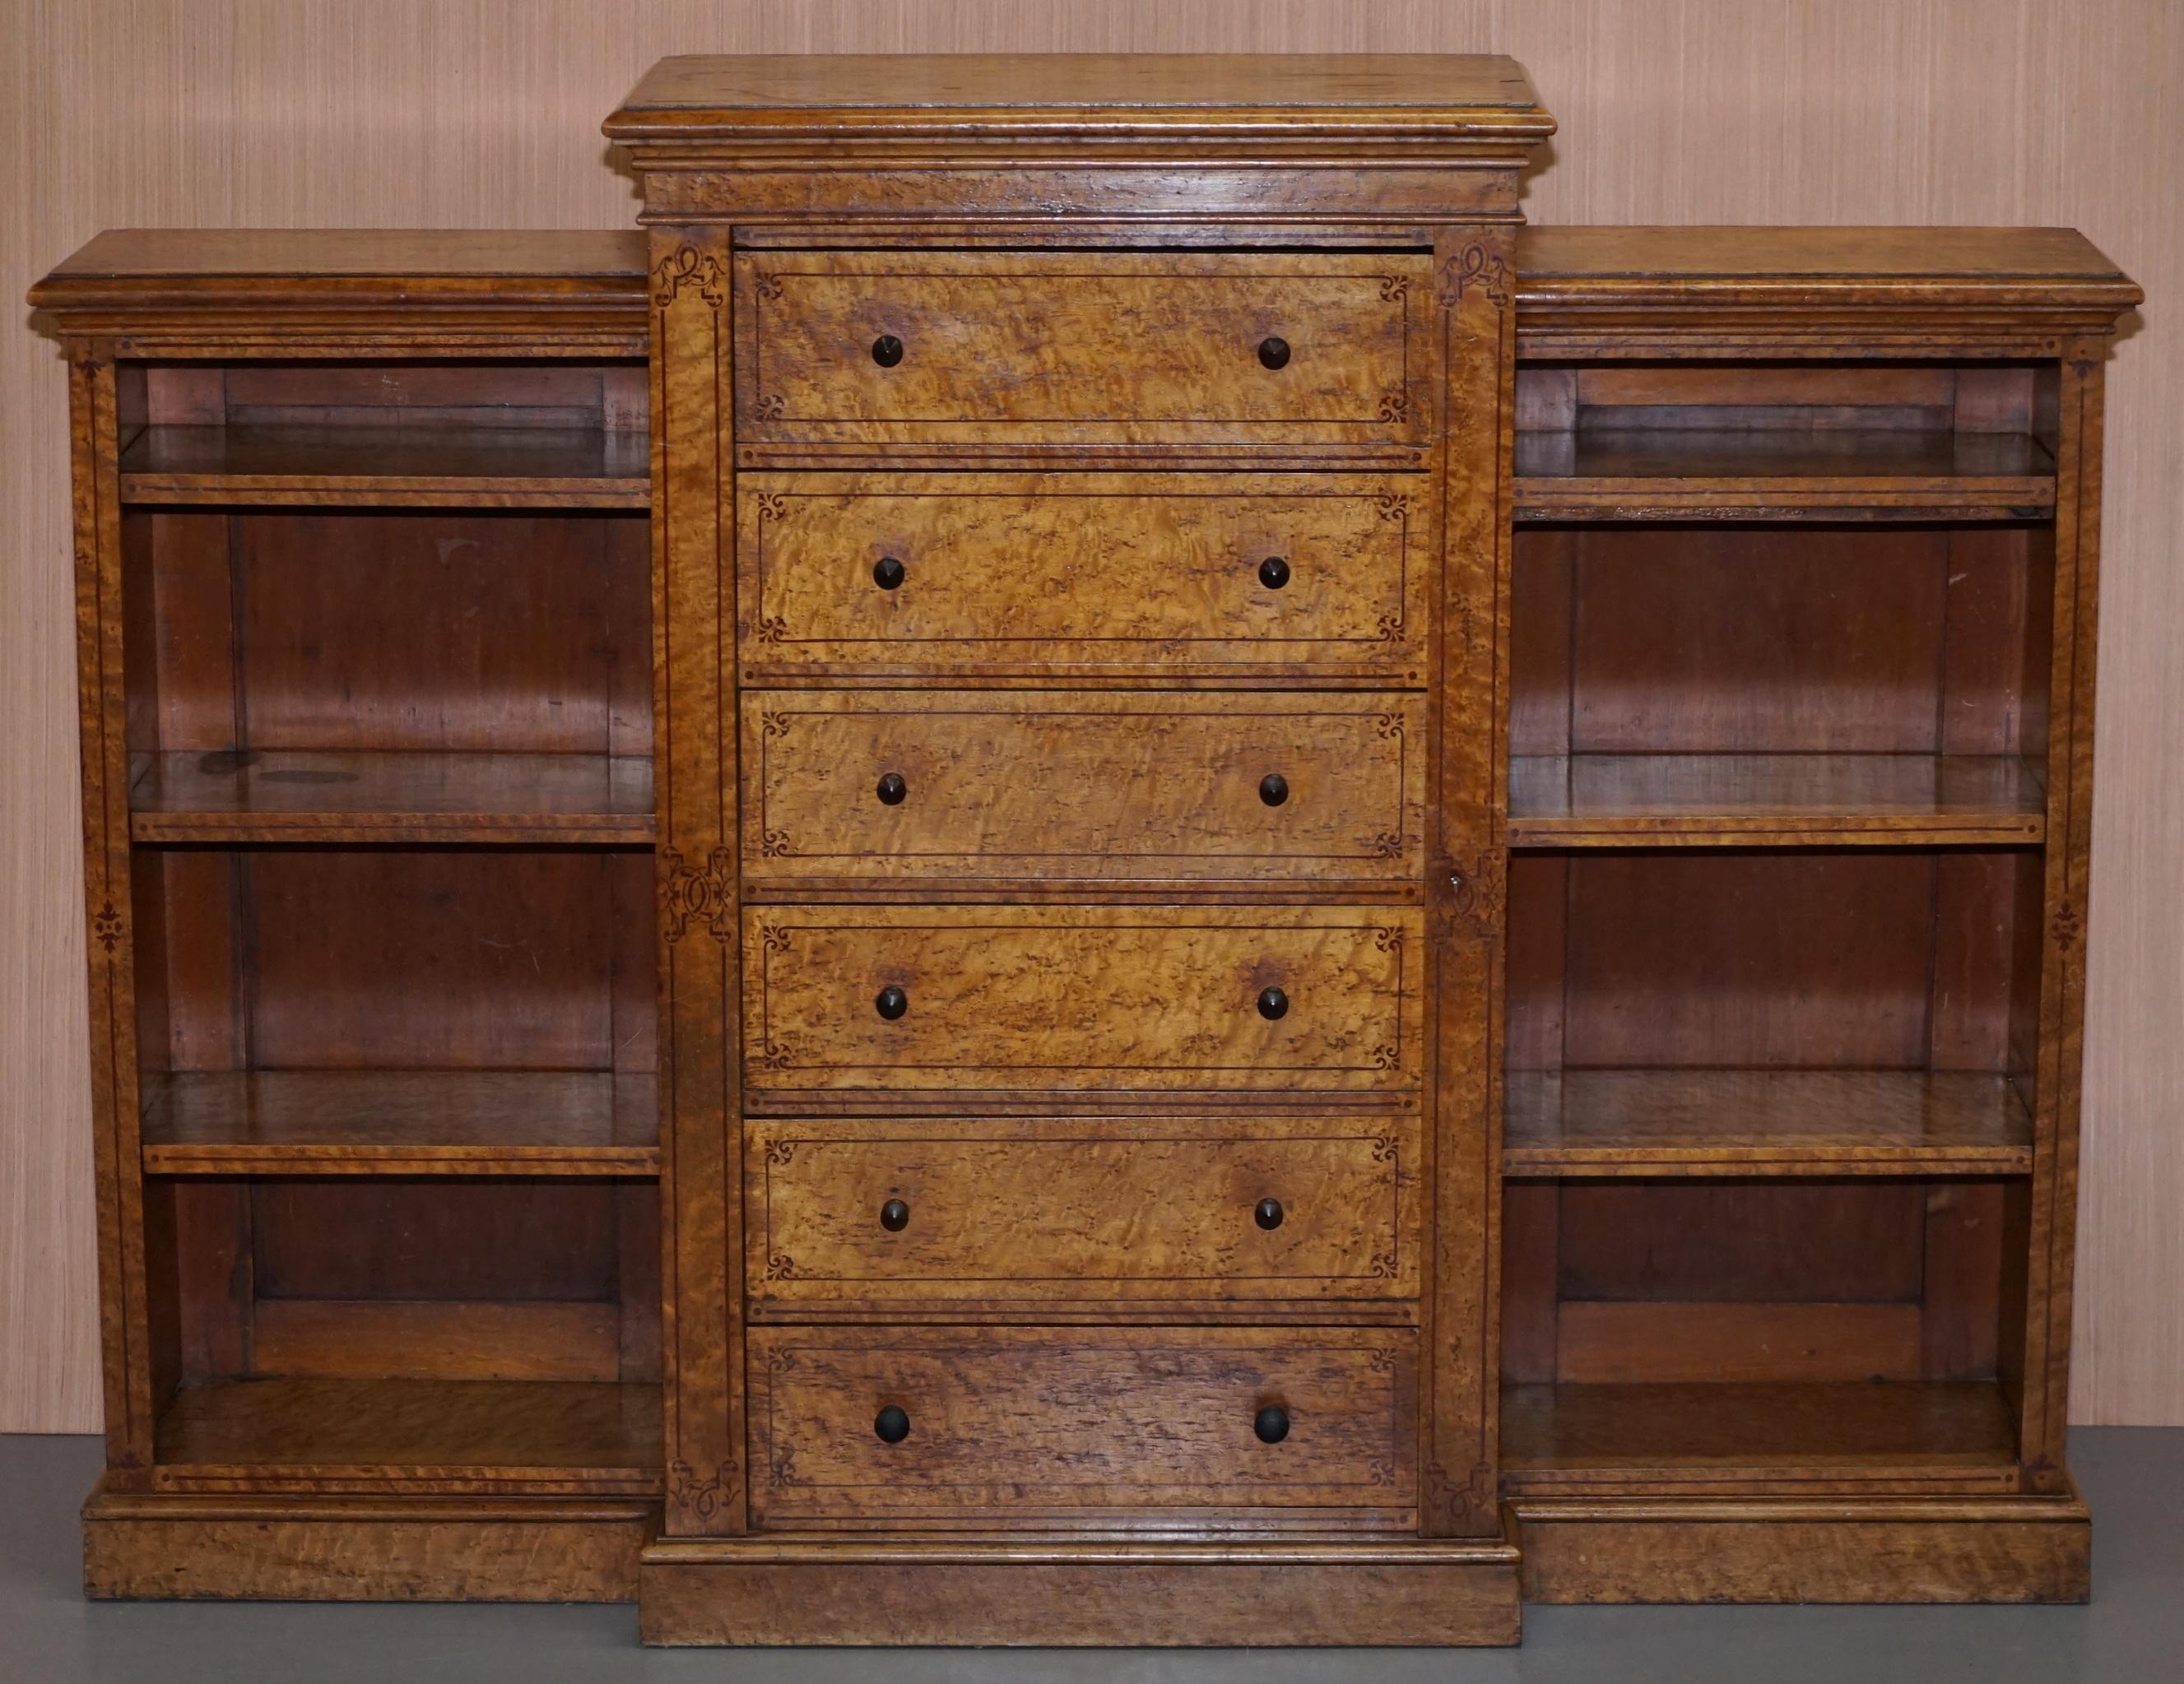 We are delighted to offer for sale this stunning very rare Victorian satinwood and burr walnut Wellington chest of drawers with built in bookcases

I have never seen a Wellington chest with a built bookcase before, it is really quite sublime. The